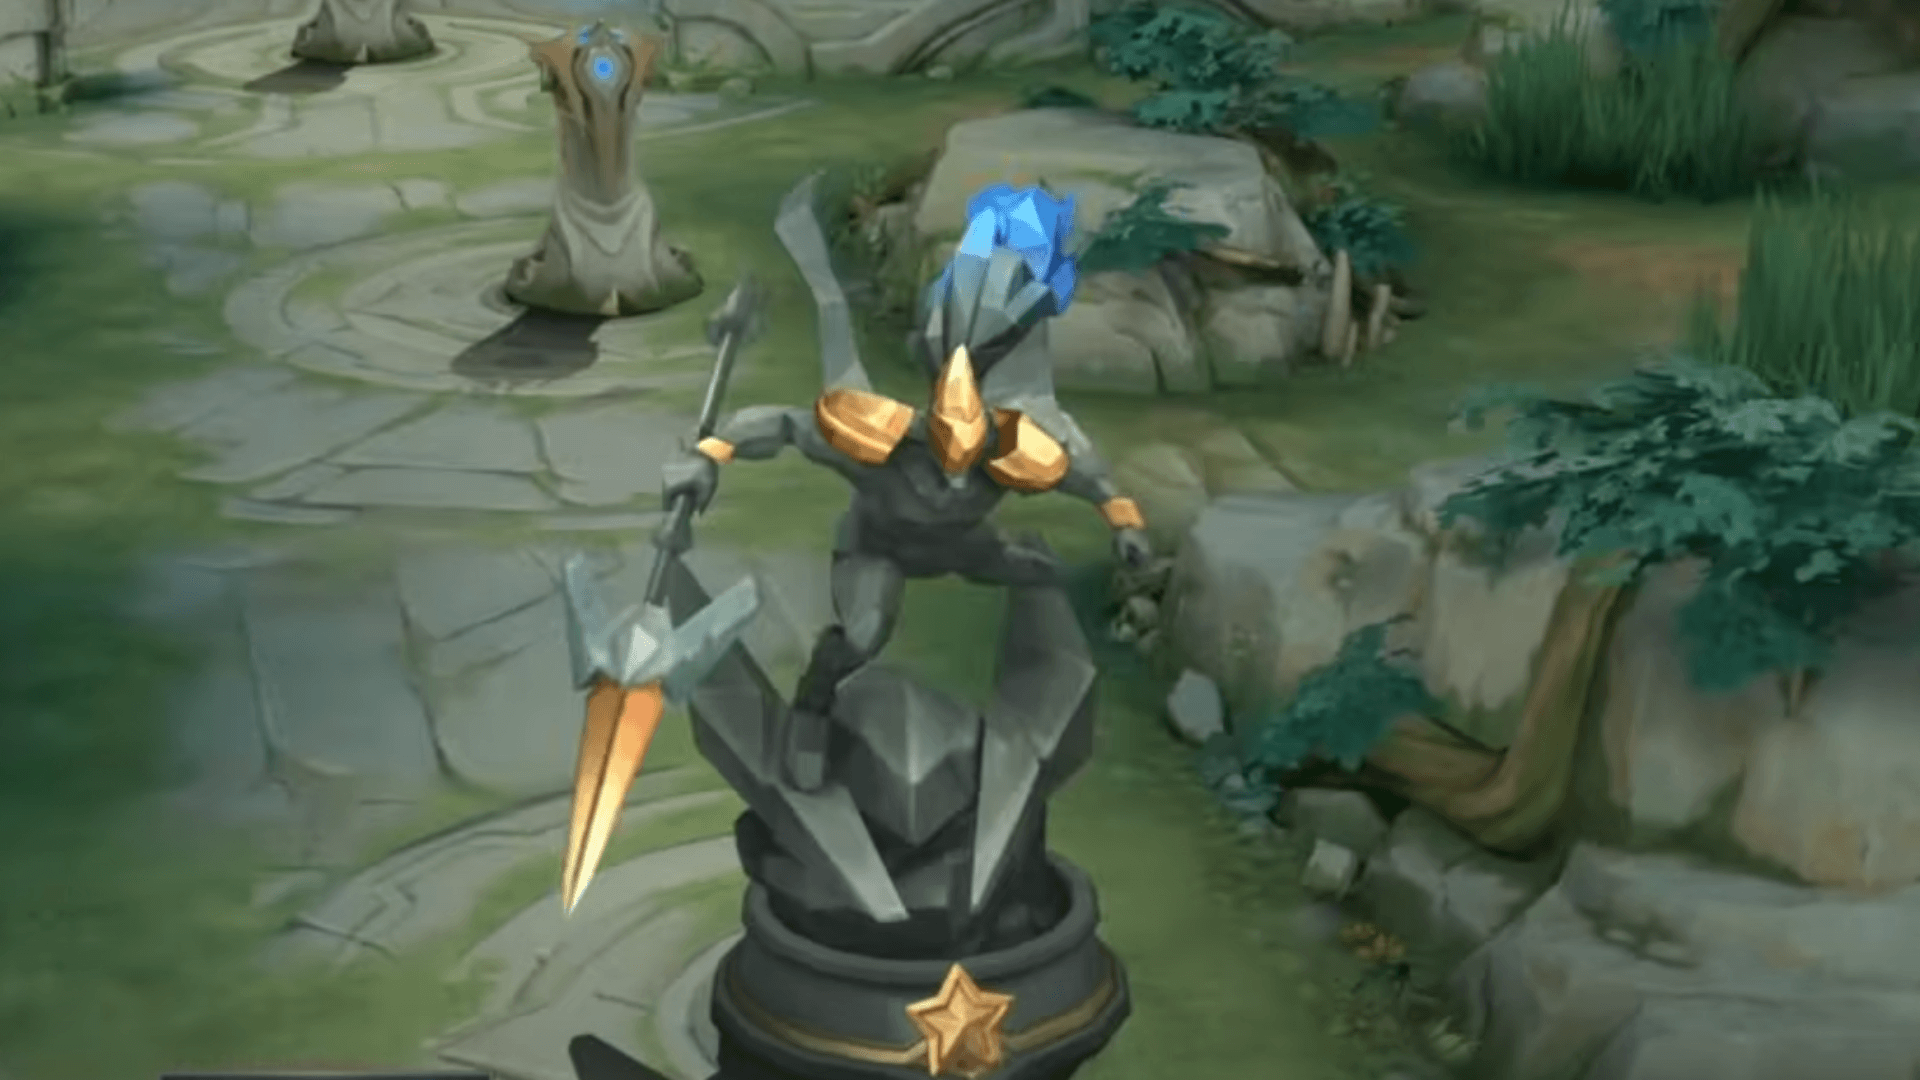 What to Expect in Mobile Legends September 2023 Leaks